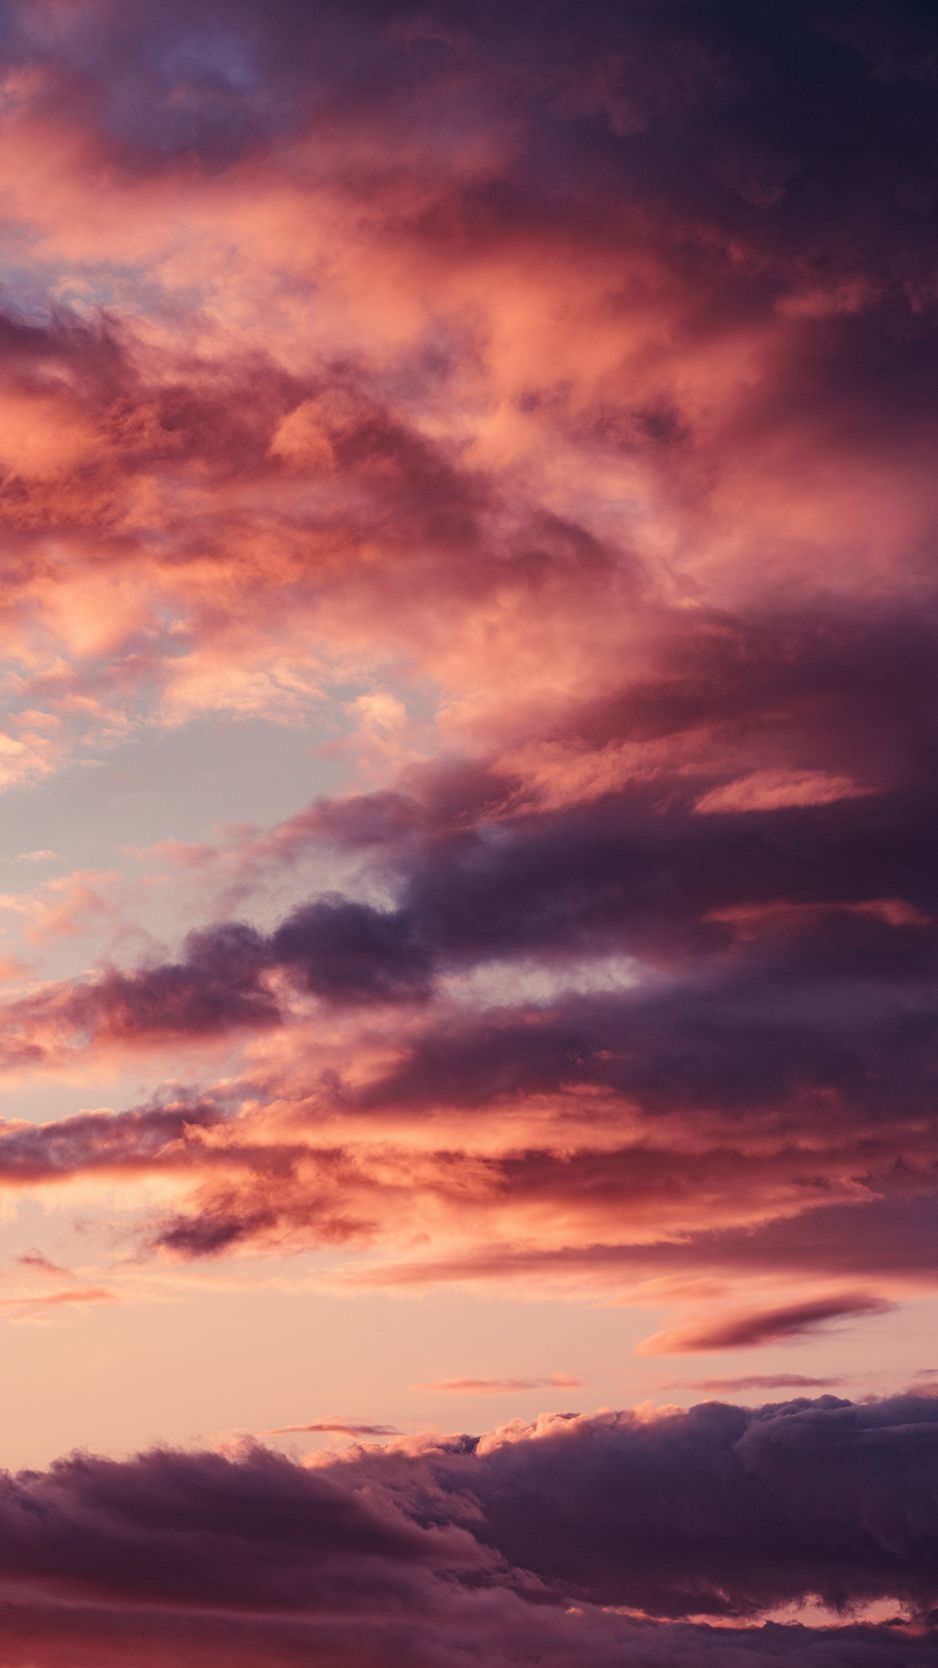 Download wallpaper 938x1668 sky, clouds, pink, sunset iphone 8/7/6s/6 for  parallax hd background